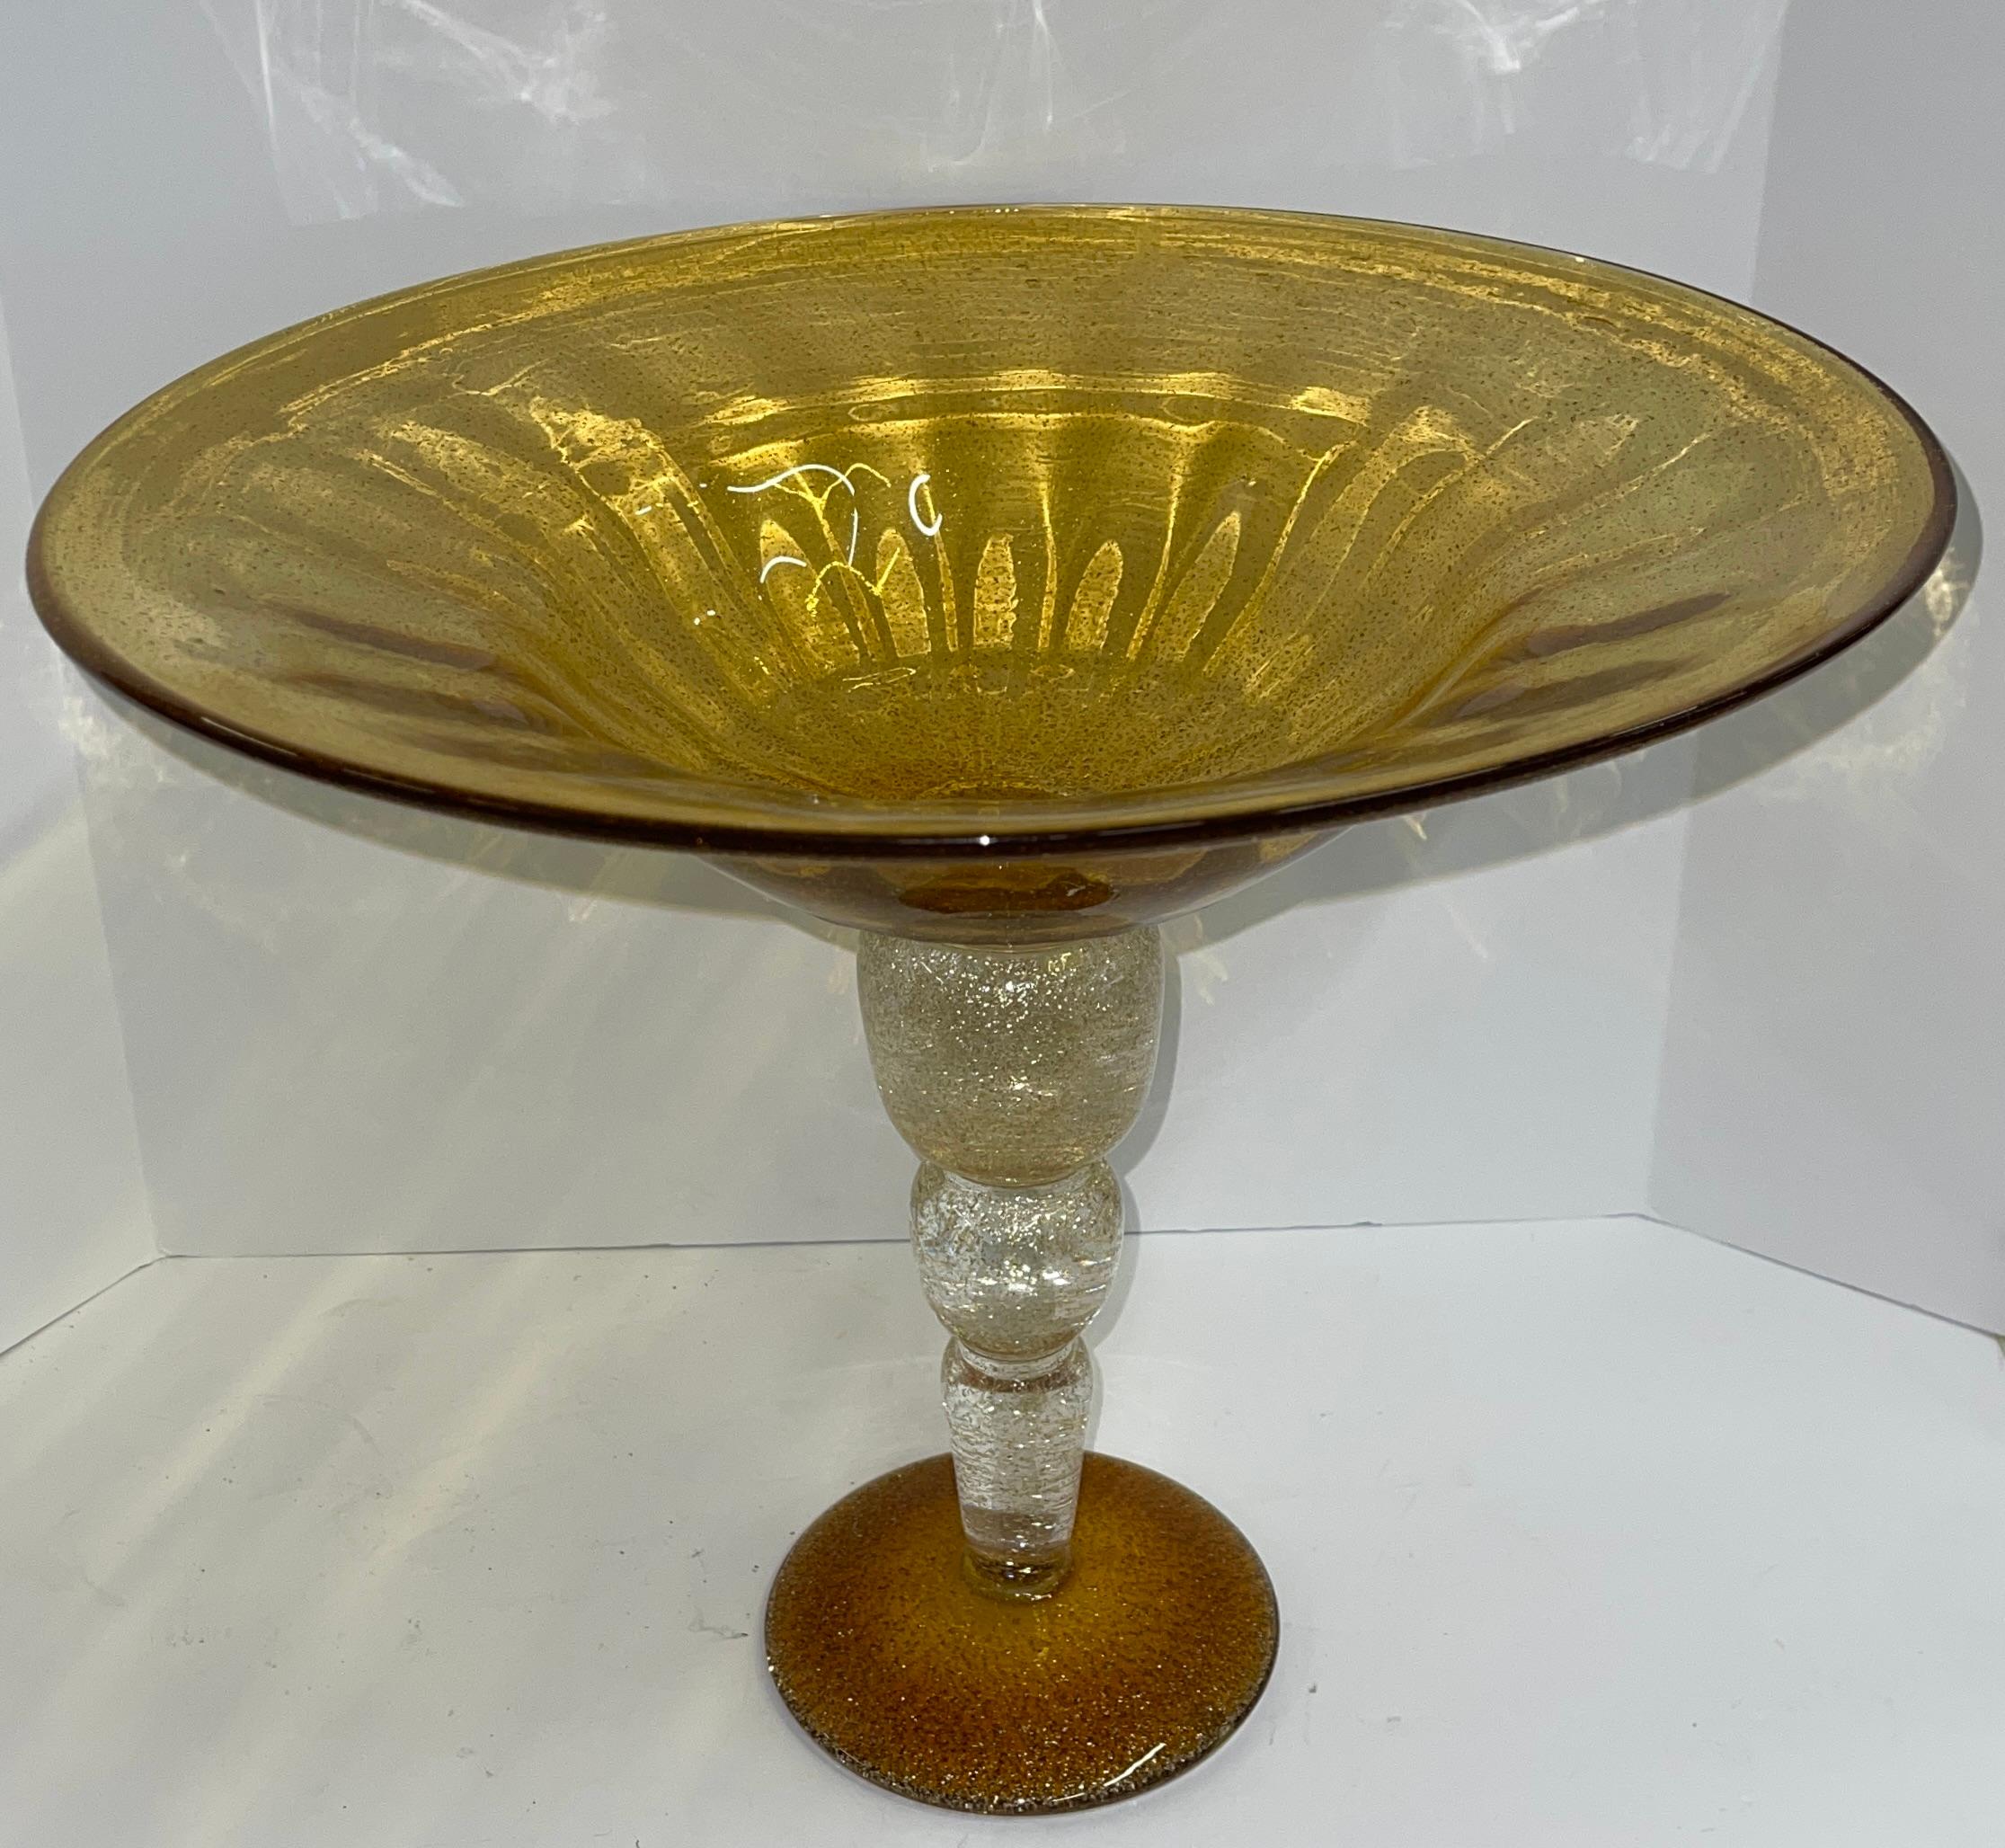 Beautiful large Murano gold flecked Tazza. Approximately 16.25 inches in diameter and 13.75 inches tall. In good condition with no chips. Retains a made in Italy gold foil tag on the bottom.